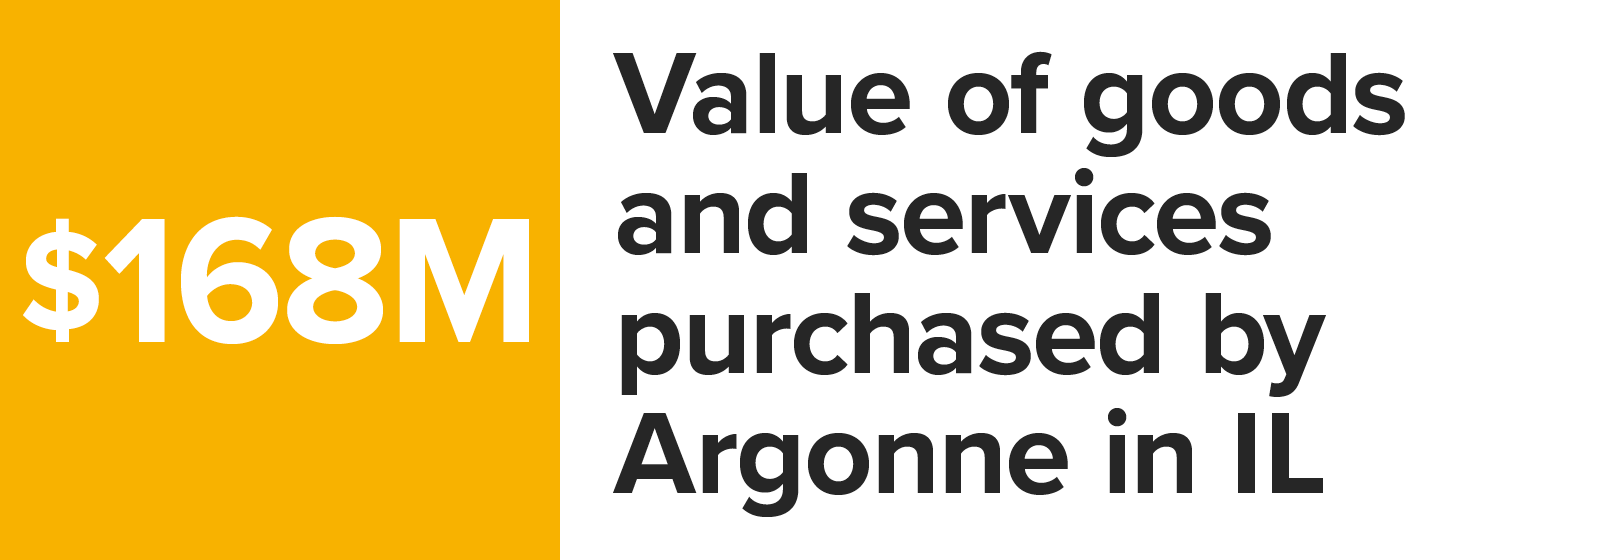 Number graphic value of goods and services purchased by Argonne in Illinois